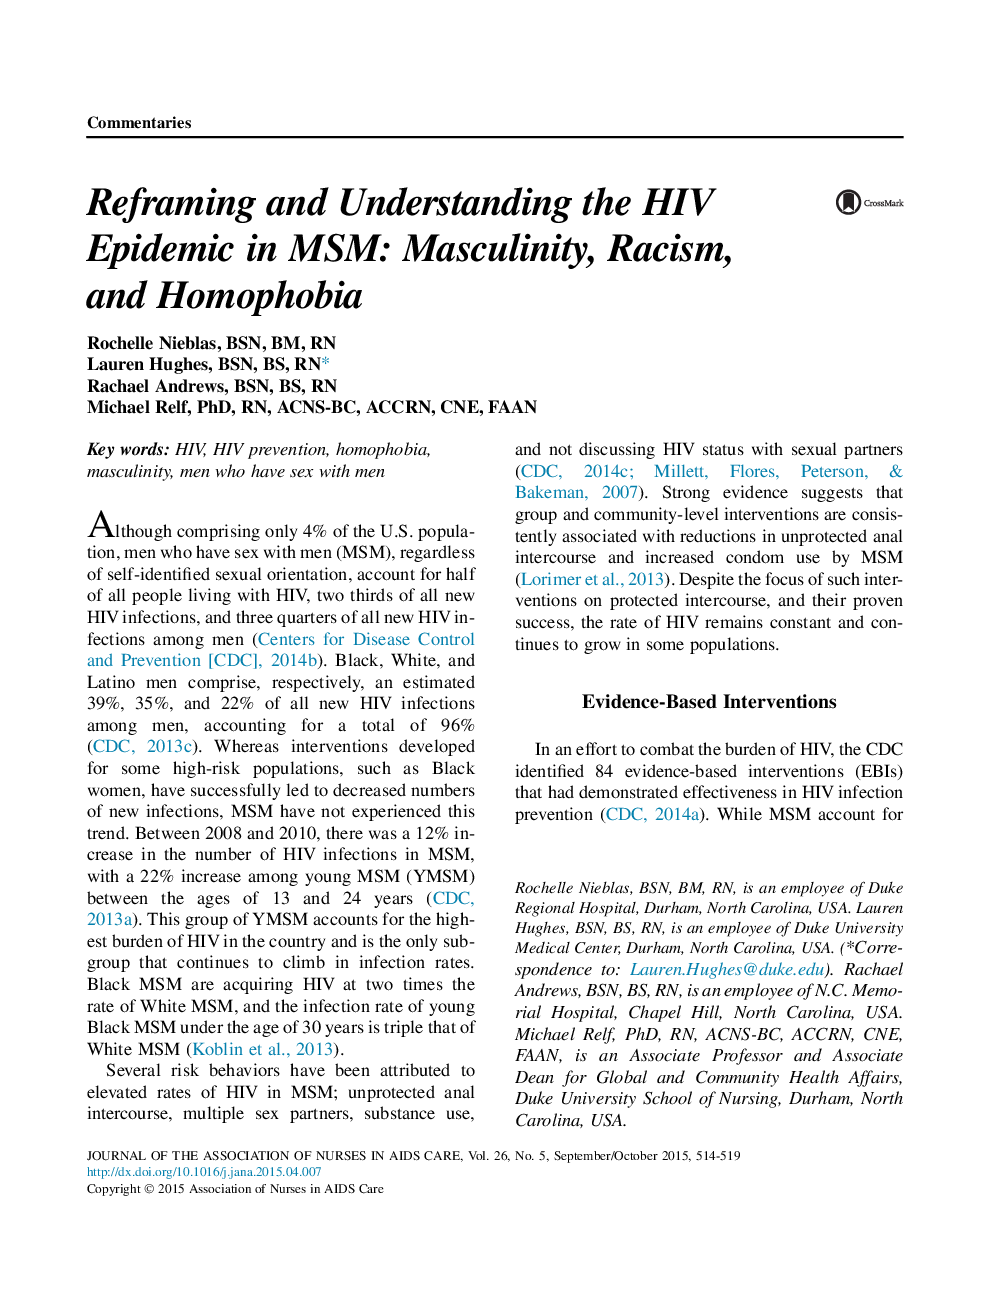 Reframing and Understanding the HIV Epidemic in MSM: Masculinity, Racism, and Homophobia